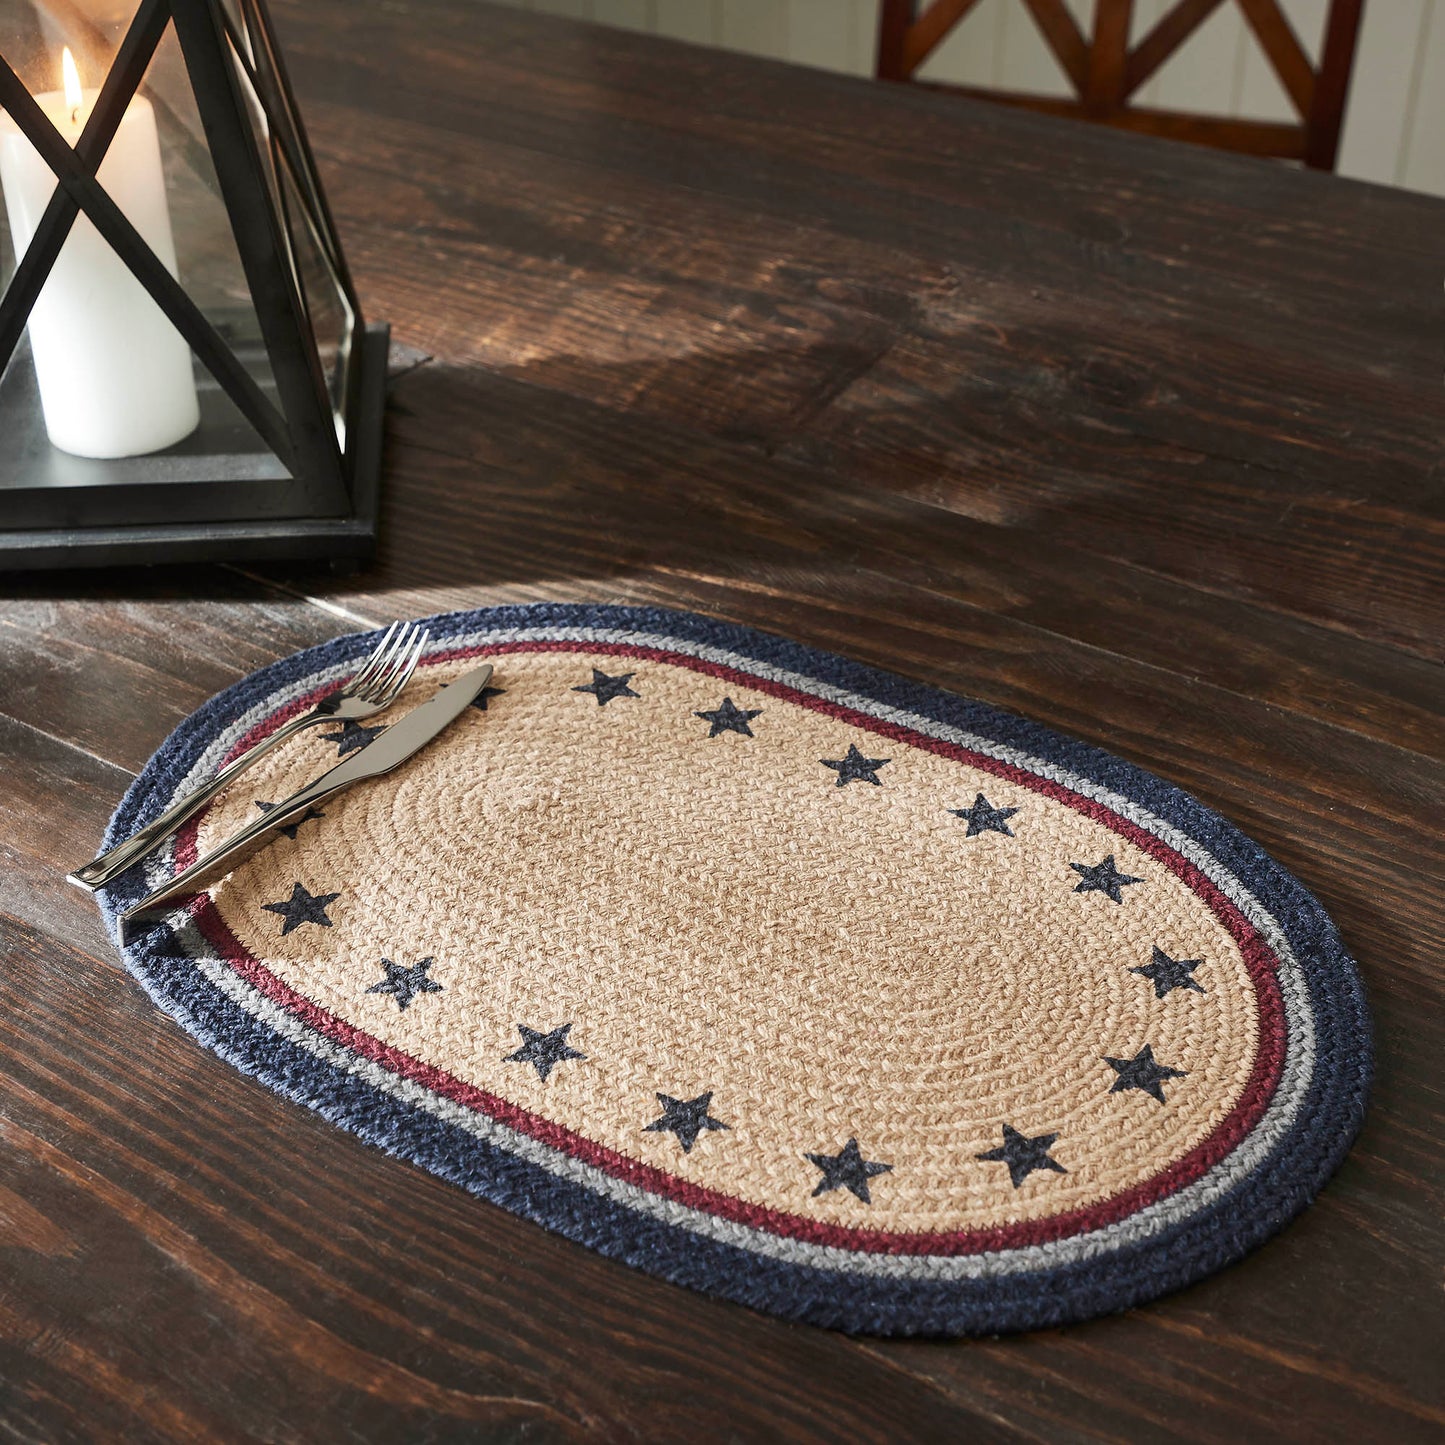 My Country Oval Placemat Stencil Stars 13x19 SpadezStore